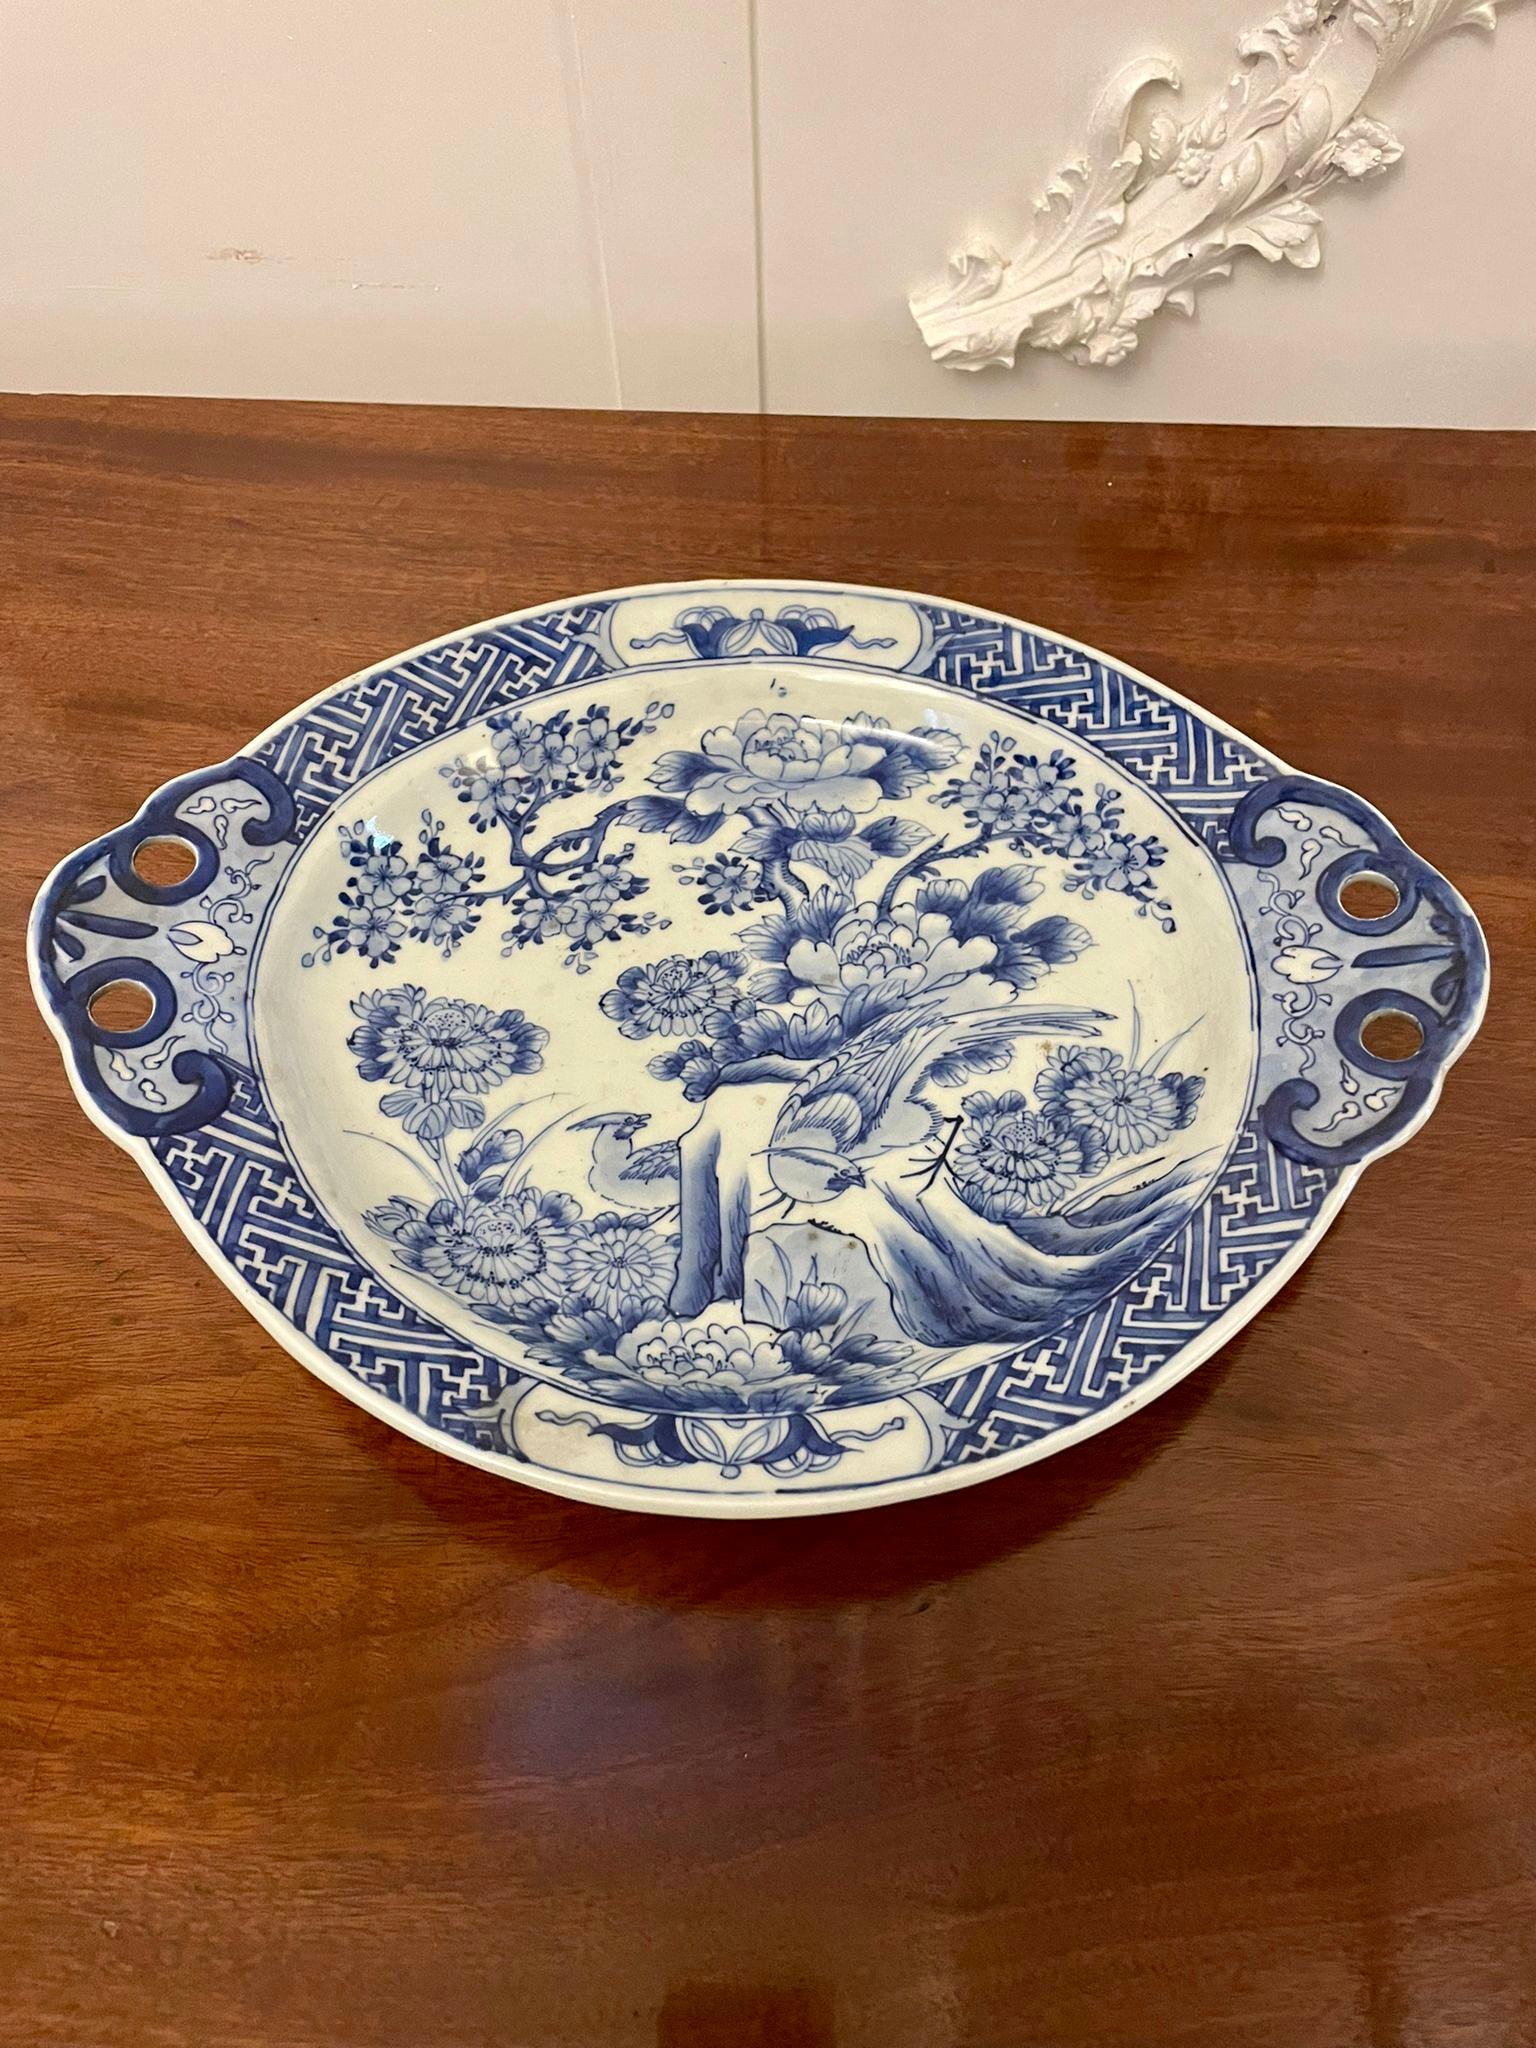 Unusual Antique quality Japanese blue and white Imari dish having a quality antique Japanese blue and white Imari dish decorated with birds, trees, flowers and boasting lovely shaped handles. 

A charming example In lovely original